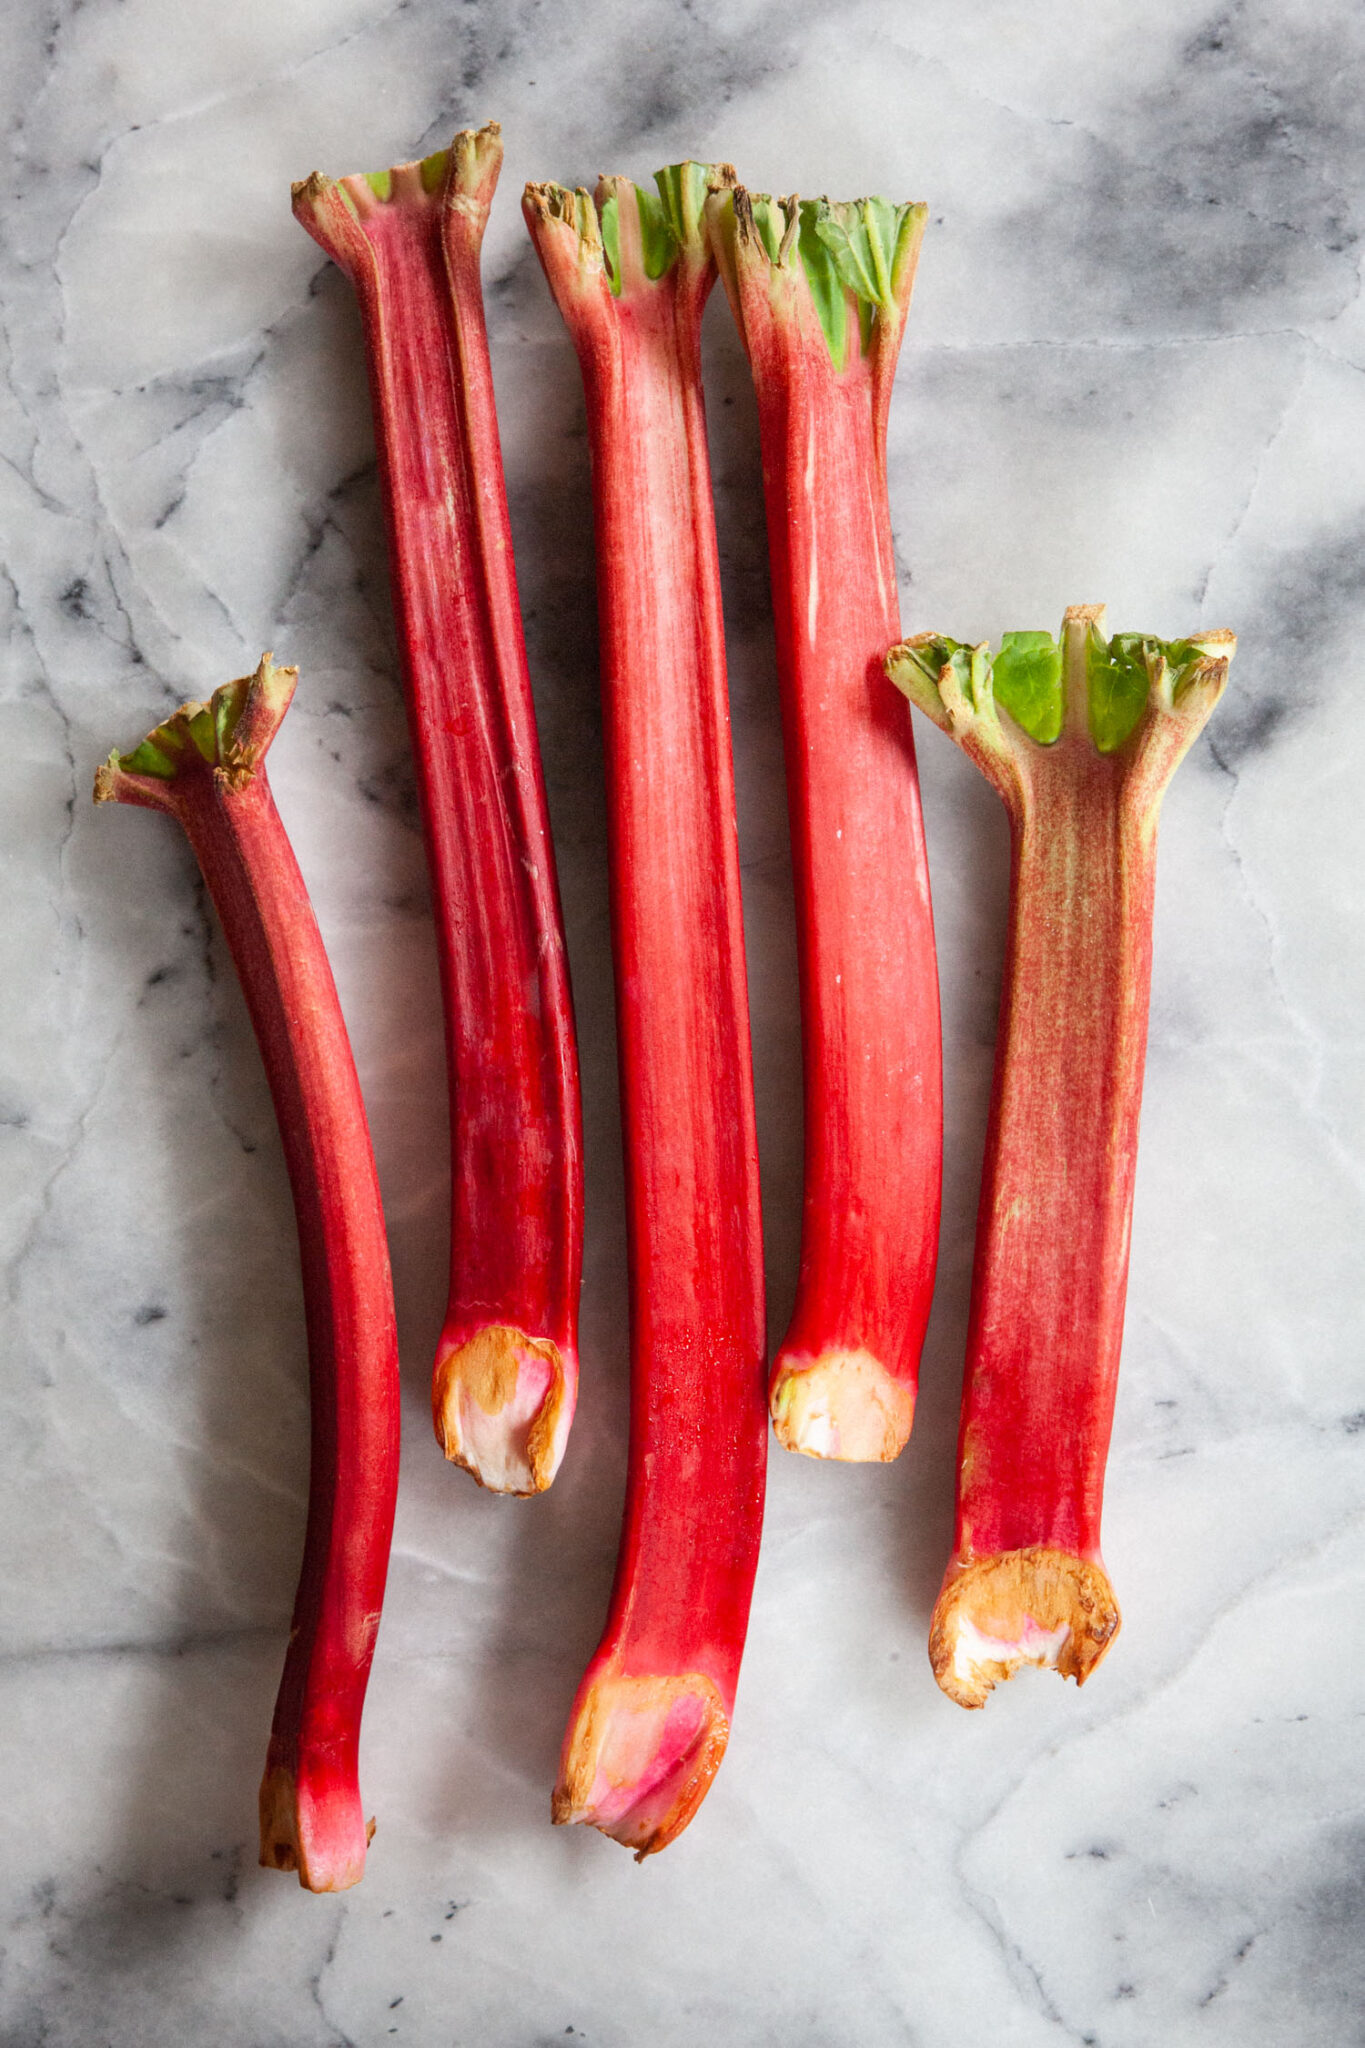 Rhubarb on a marble surface.